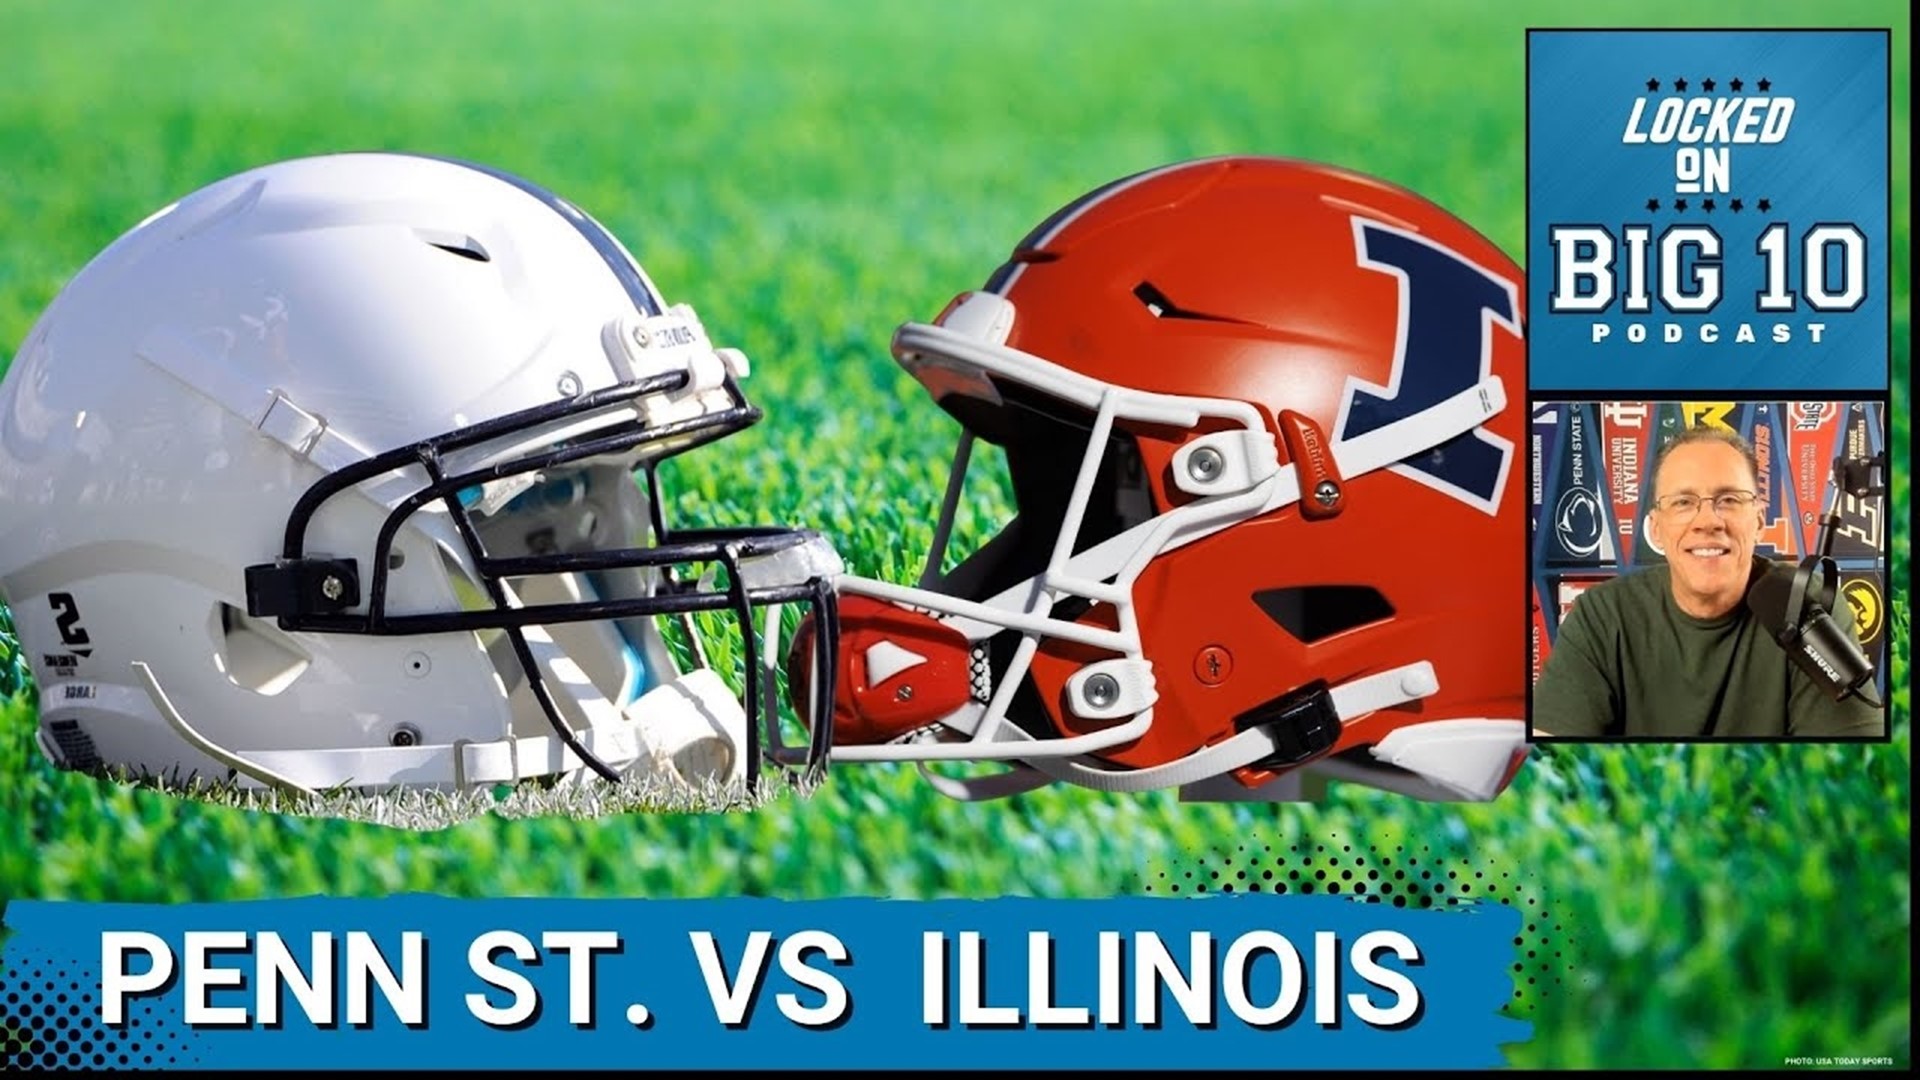 The Penn State Nittany Lions face the Illinois Fighting Illini Saturday in a matchup of Big 10 foes.  The last time they met a 9OT classic emerged!